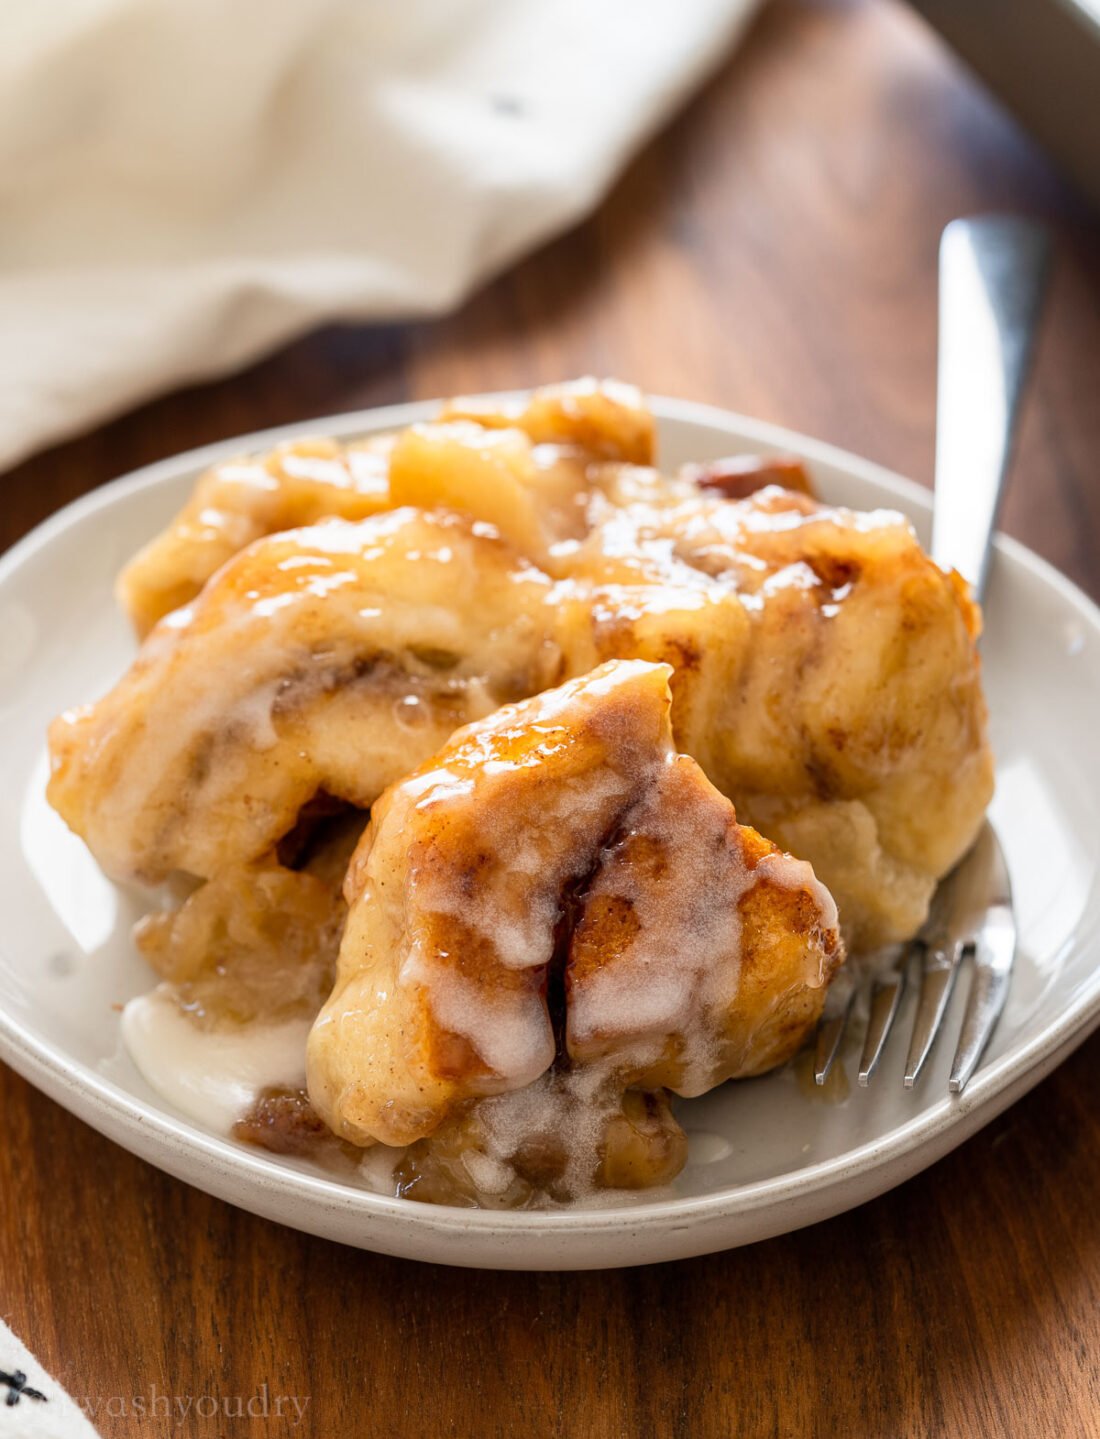 plate full of cinnamon roll and apples.